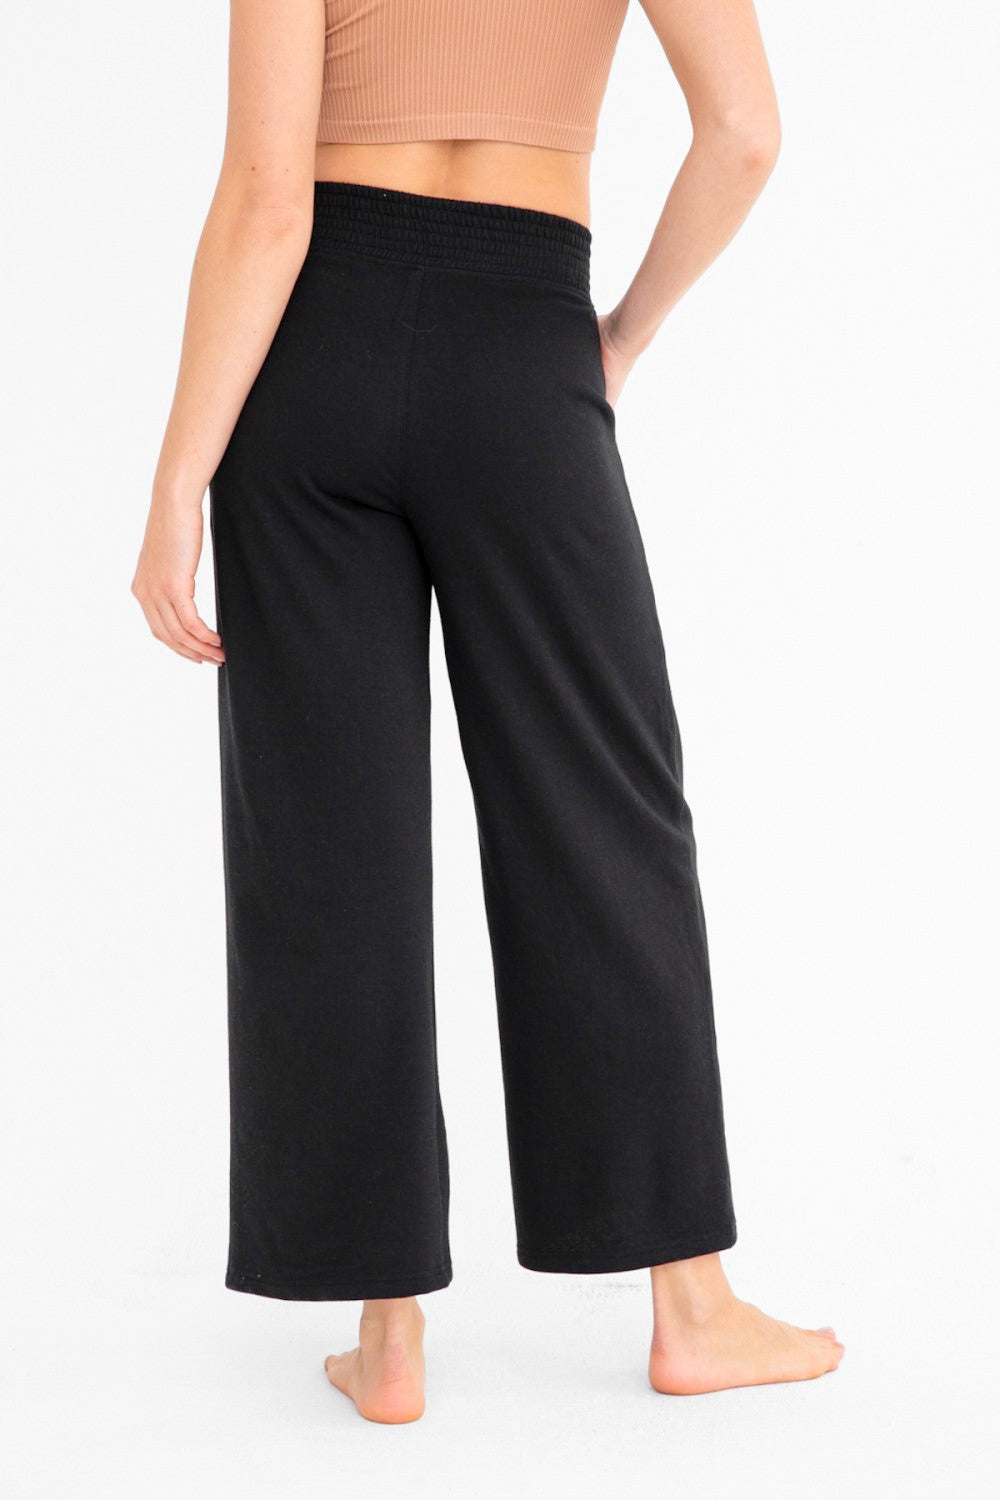 Ribbed Crossover Waist Lounge Pants - KPR11859 (Ready to ship)